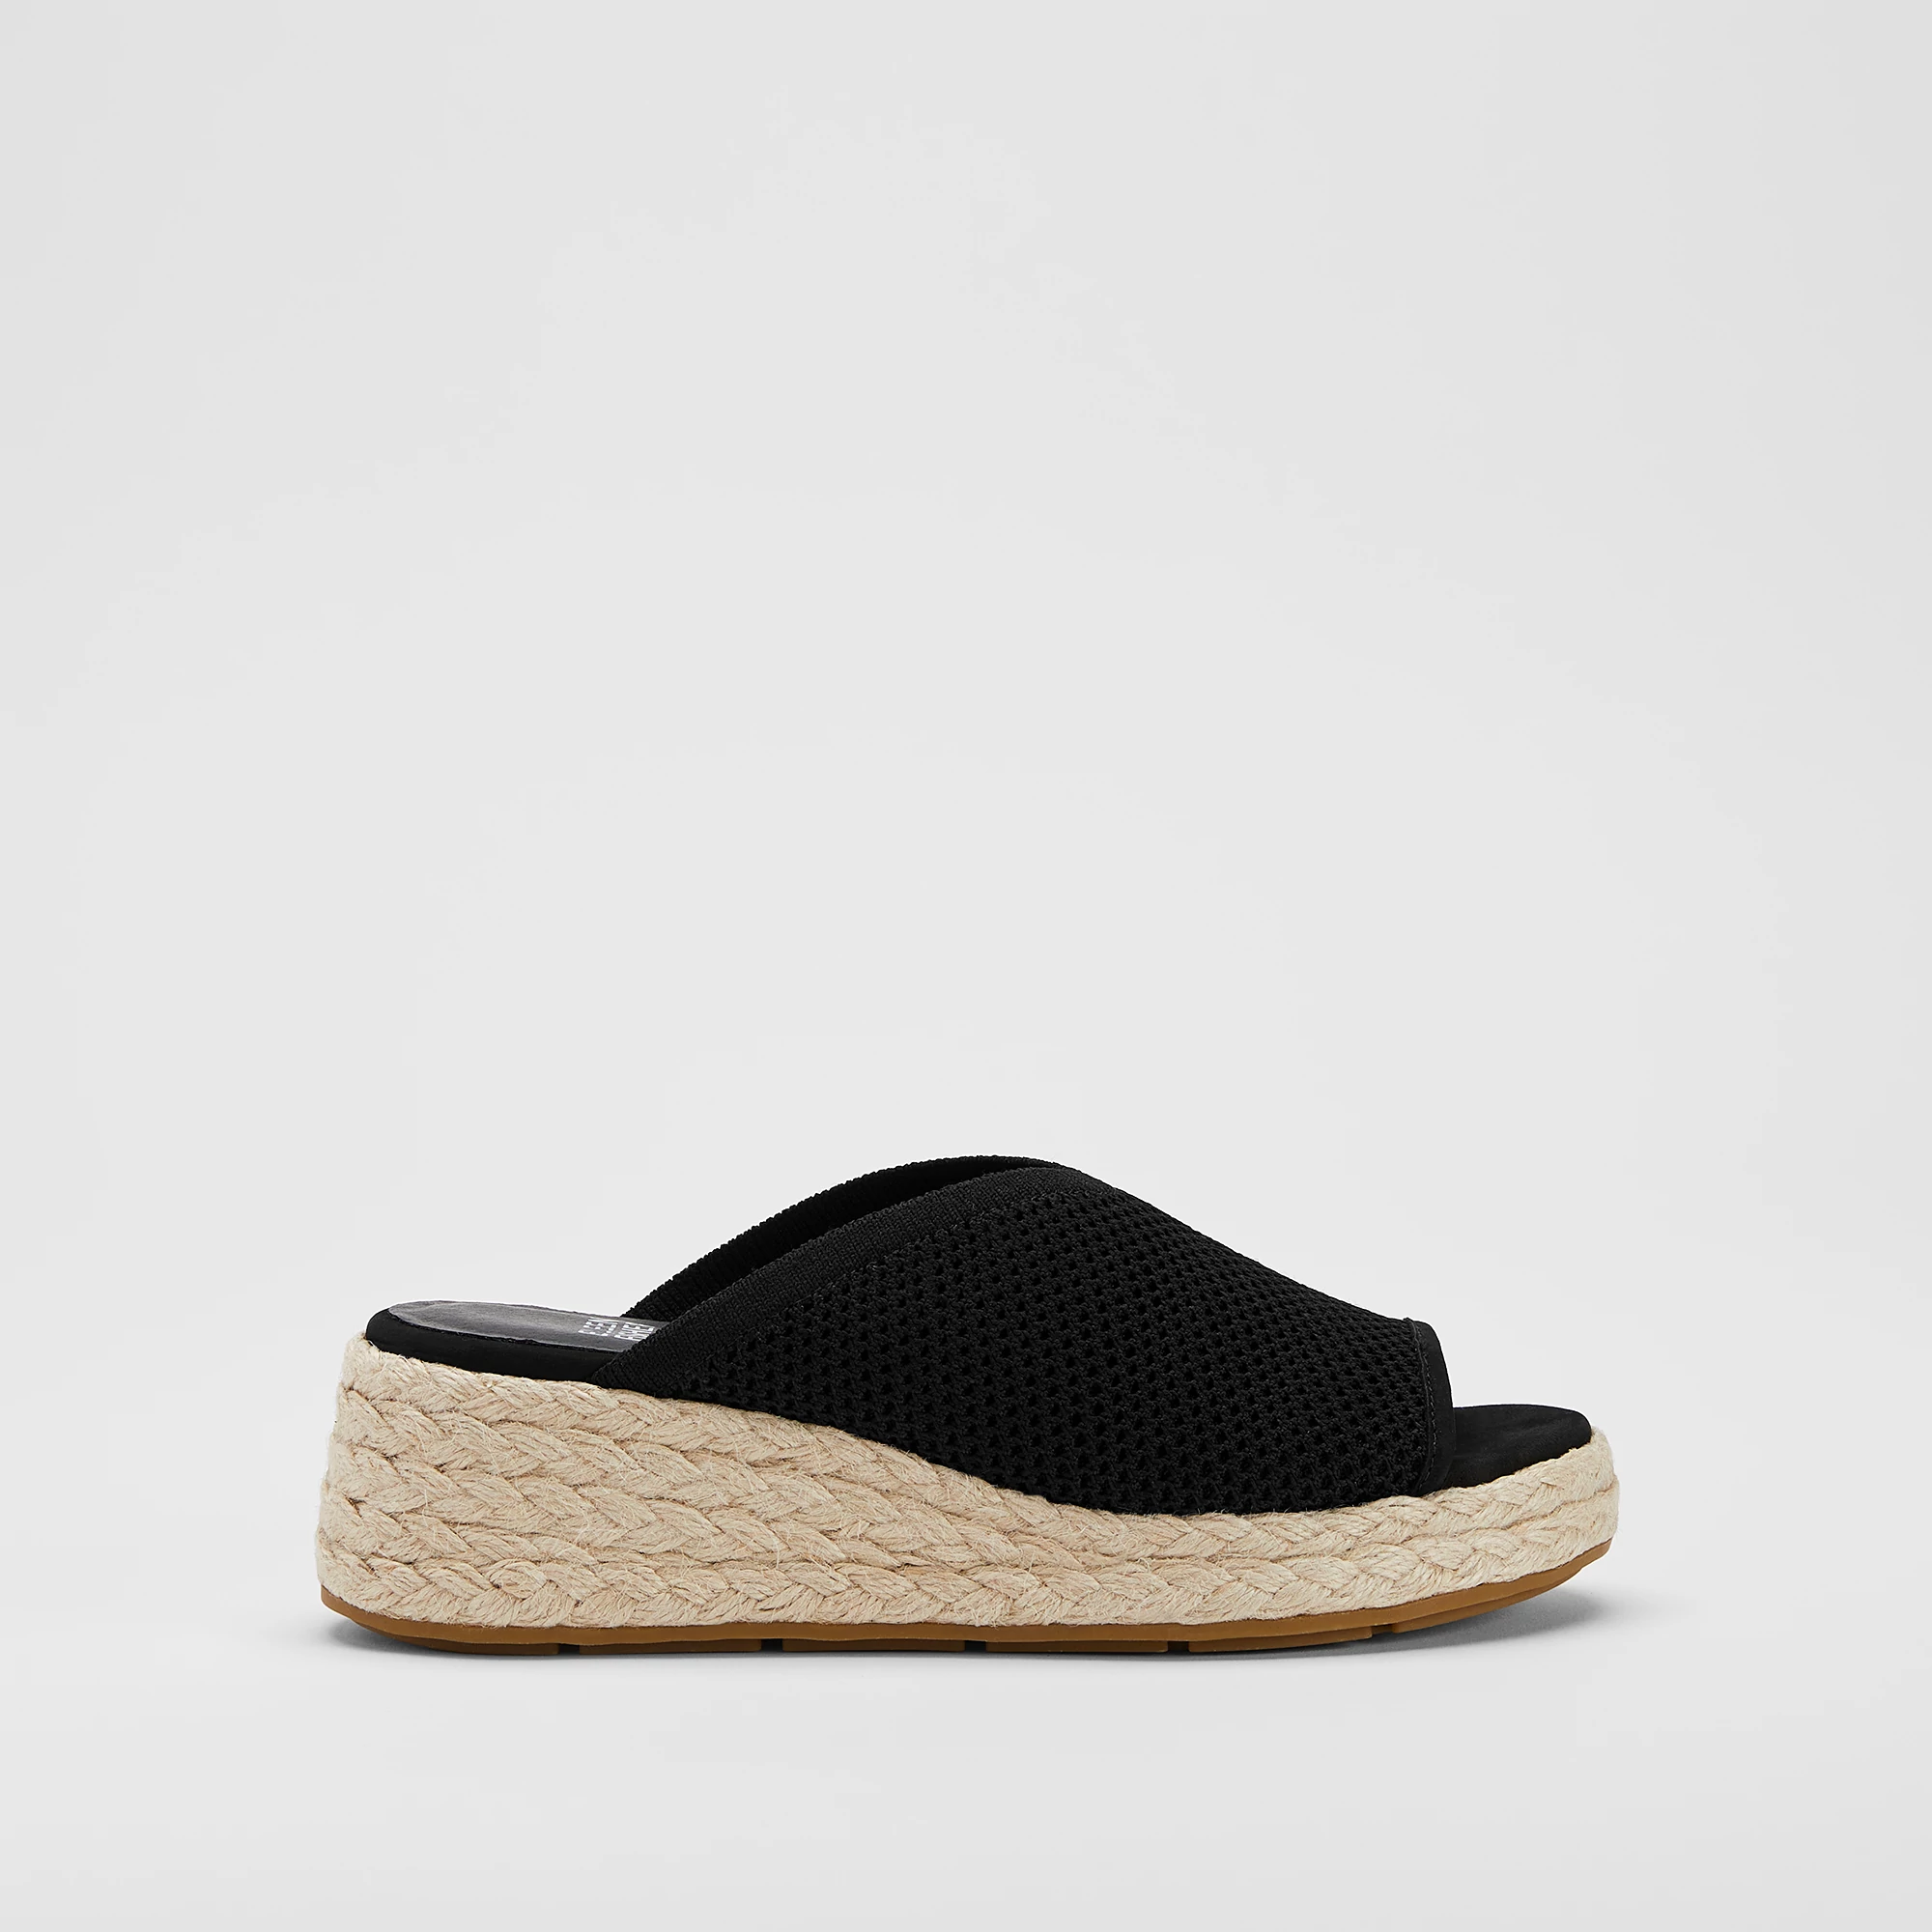 Tali Recycled Stretch Knit Espadrille Wedge Sandal | EILEEN FISHER